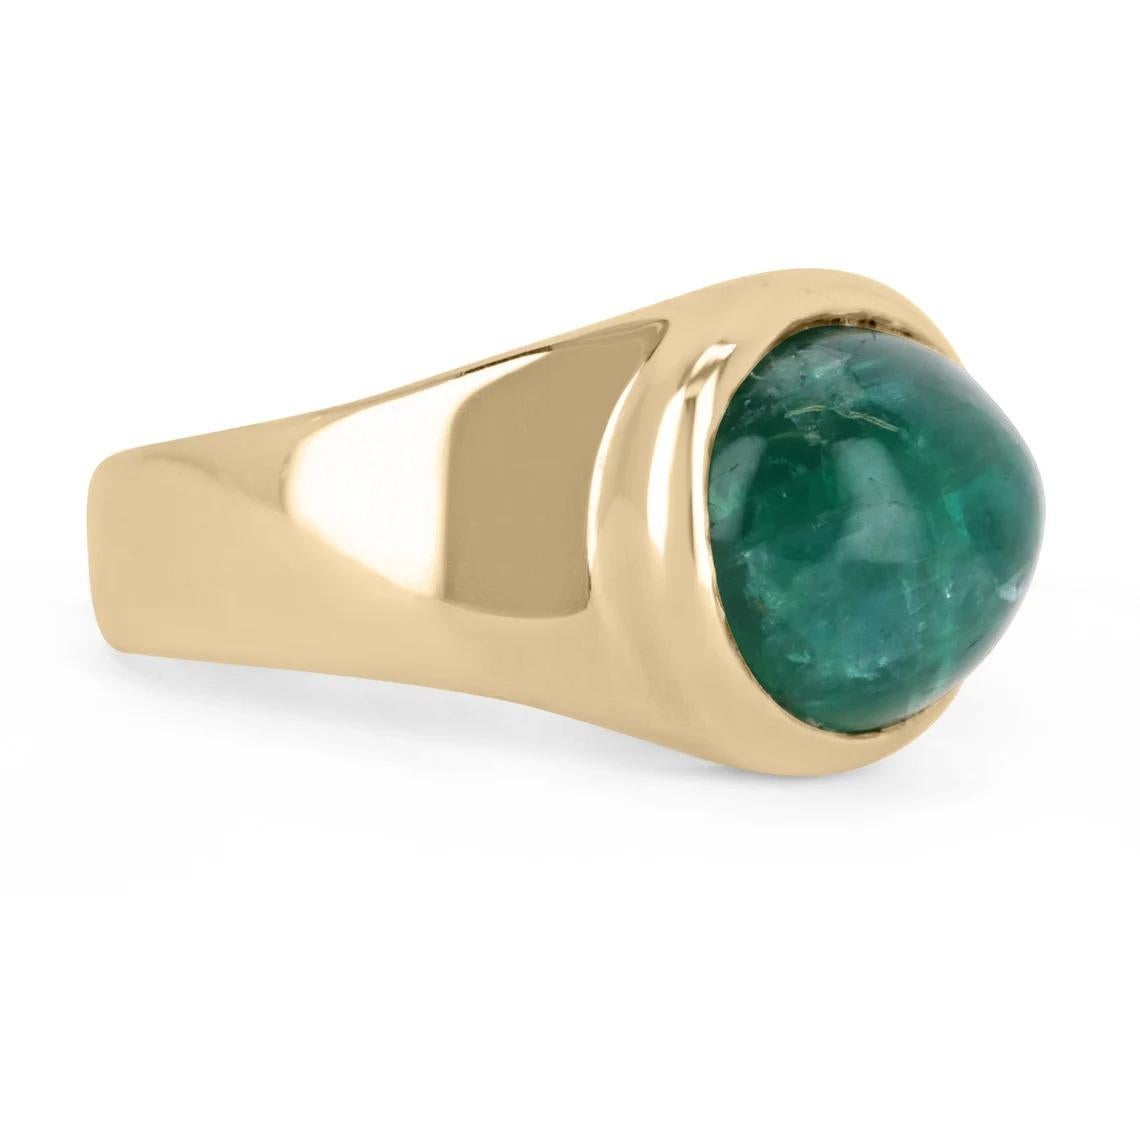 A classic, solitaire emerald cabochon ring. The cabochon is a full 6.23-carats, with rich dark green color and excellent luster. Carefully bezel set into 14K yellow gold, creating a simple and sophisticated ring for everyday wear.

Setting Style: